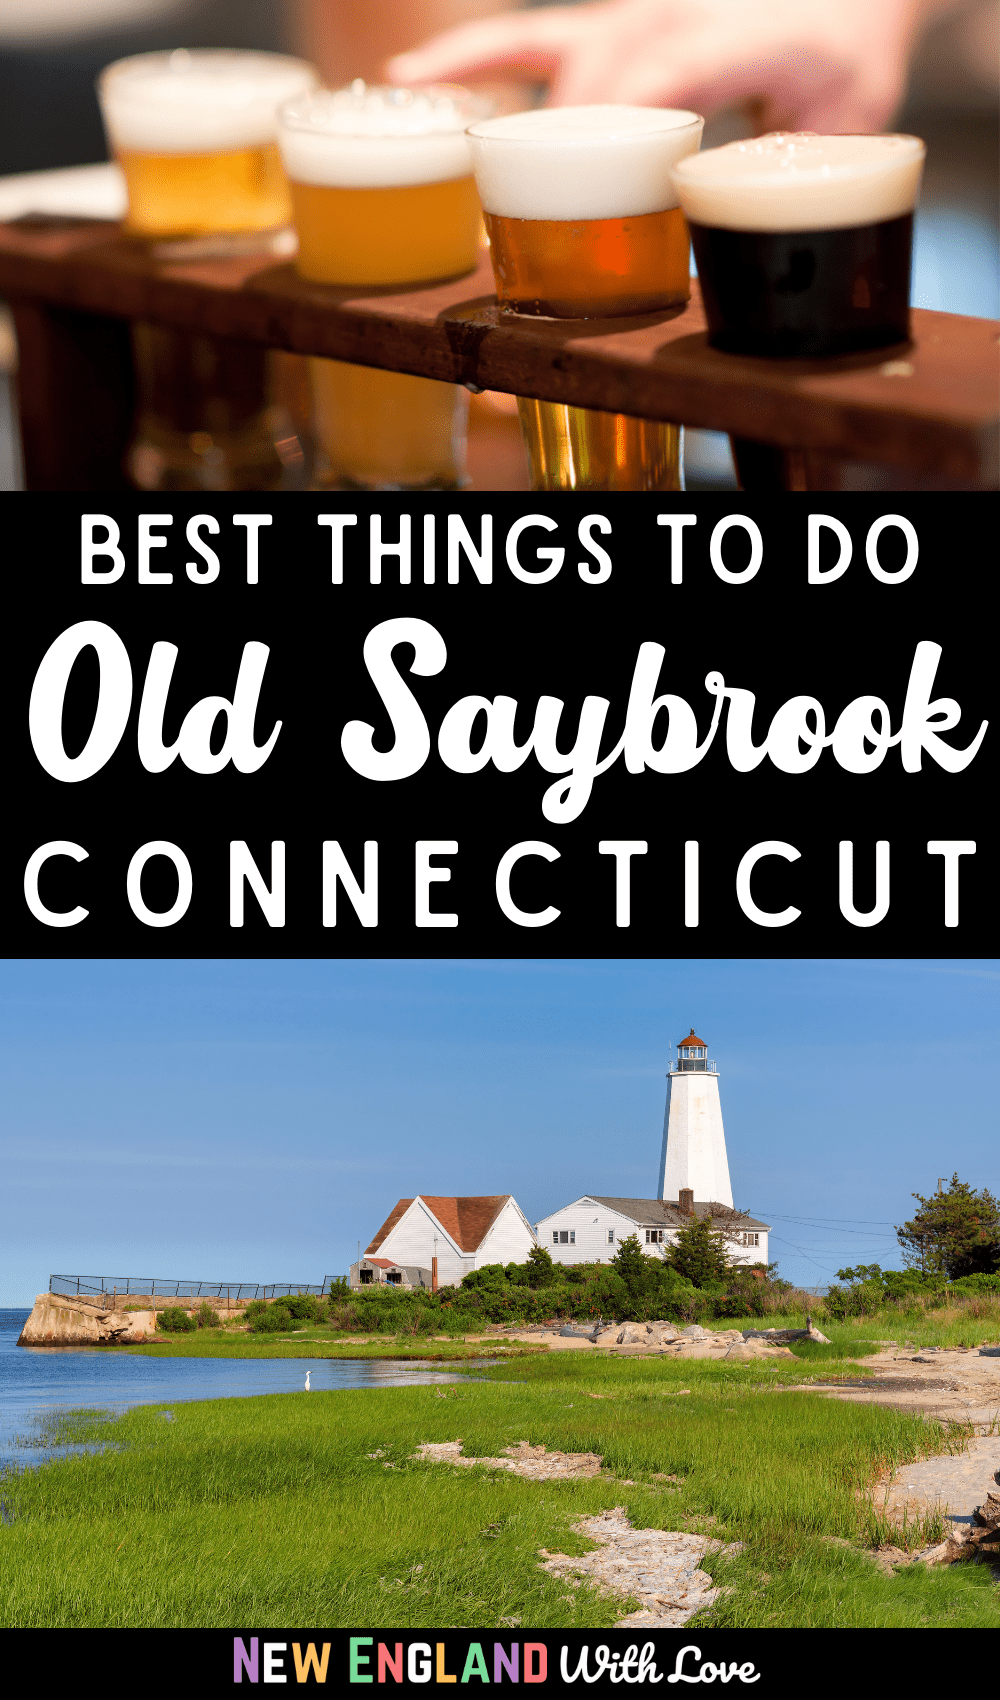 Pinterest graphic reading "Best Things To Do Old Saybrook Connecticut" with a picture of a lighthouse below